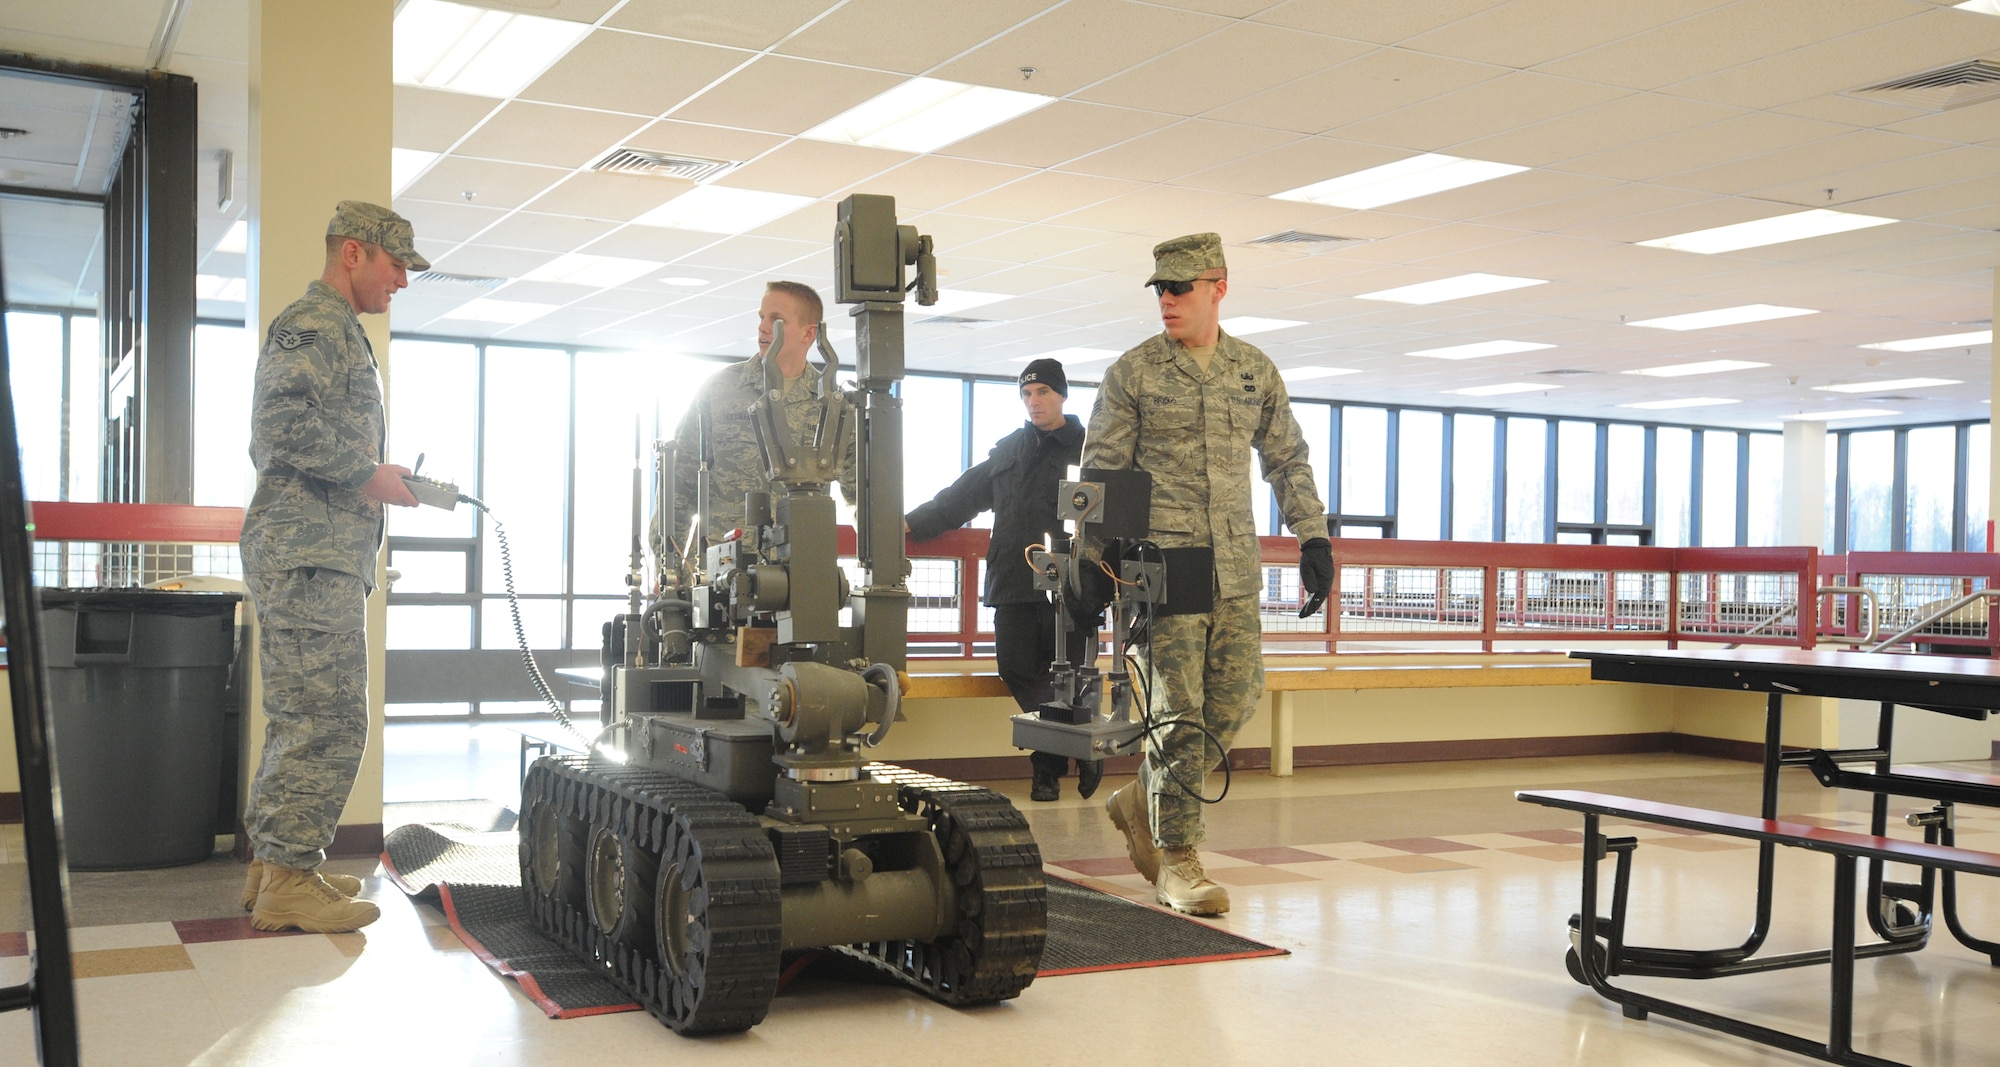 WASILLA, Alaska -- Airmen from the Elmendorf Explosive Ordnance Disposal team bring their Andros 6 bomb robot into Wasilla High School to prepare to scan for any traces of explosives within the school facility, Jan. 8. Elmendorf's EOD unit teamed up with the Anchorage and Wasilla Police Departments to absolve the bomb threat situation in the area. This was a significant moment in the military and local community relations under a no-notice, real world situation. (U.S. Air Force photo/Senior Airman Matthew Owens)